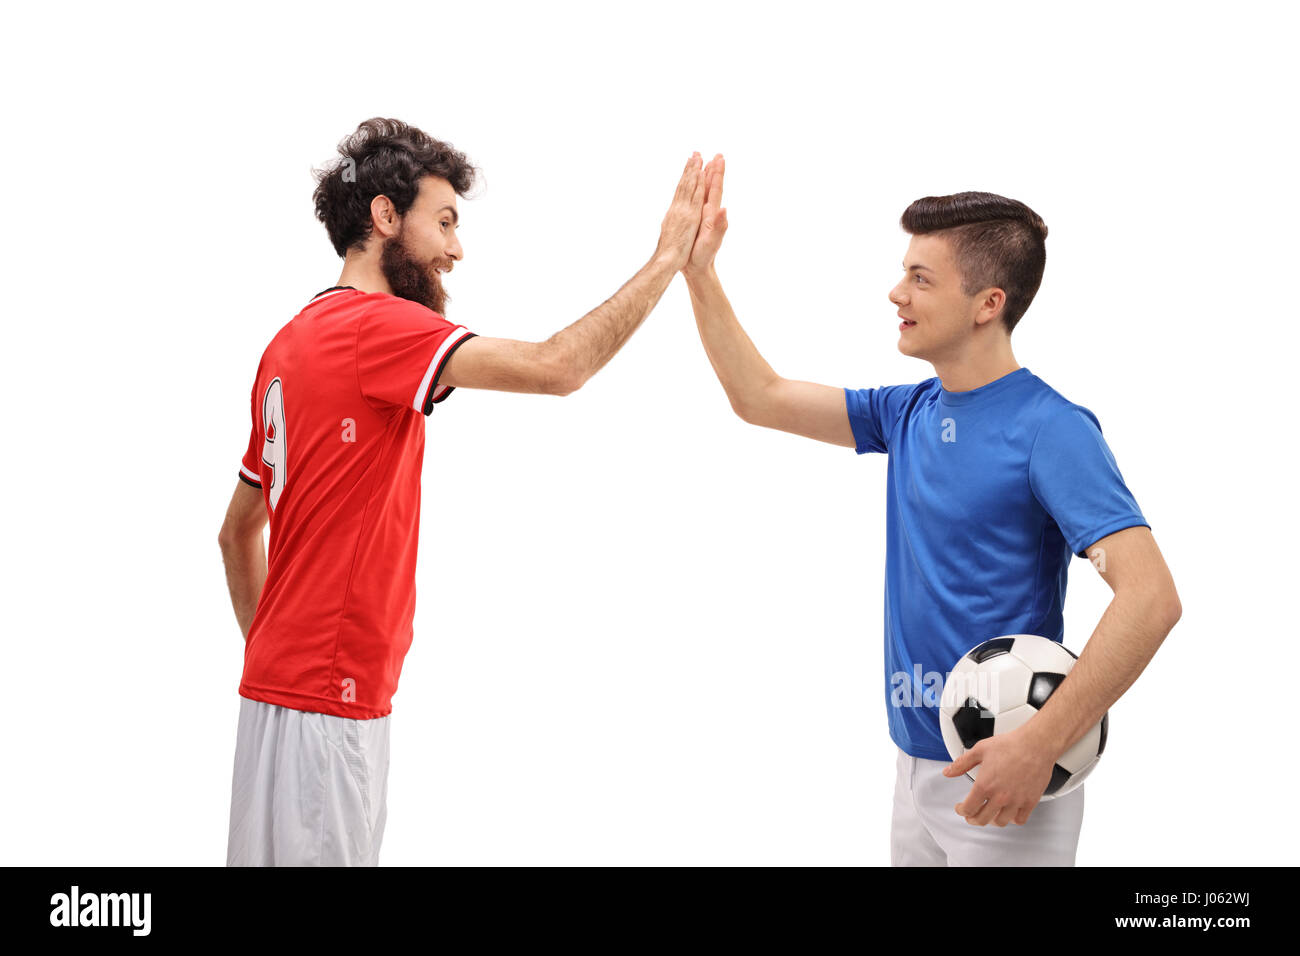 Father and son dressed in sport jerseys high fiving each other isolated on white background Stock Photo